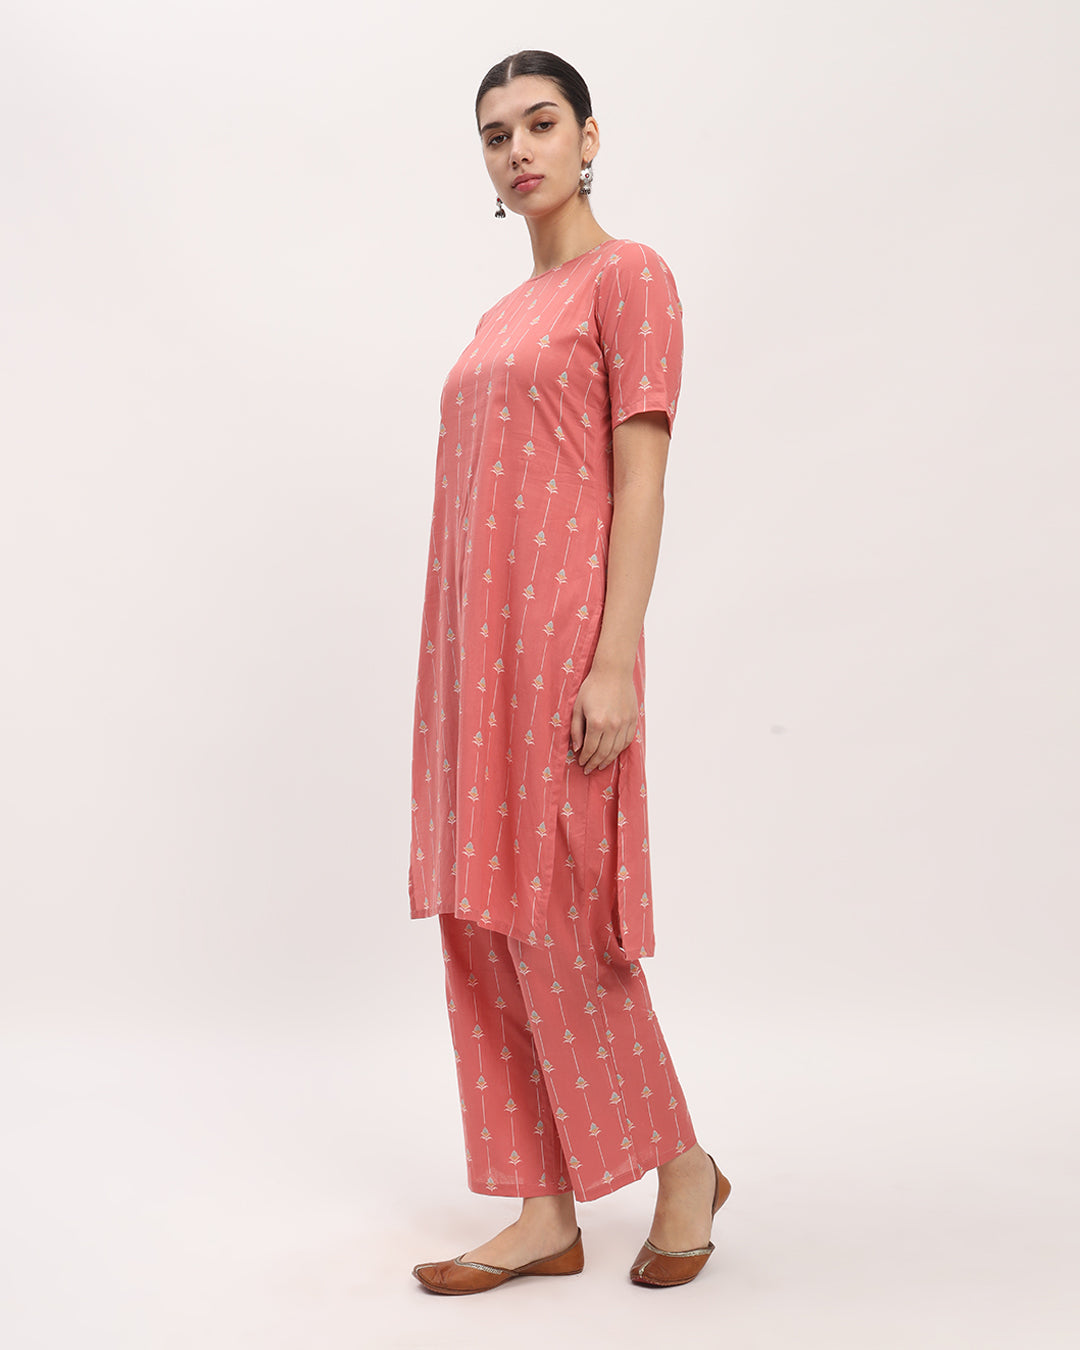 Combo: English Floral Track & Maple Leaf Round Neck Printed Kurta (Without Bottoms)